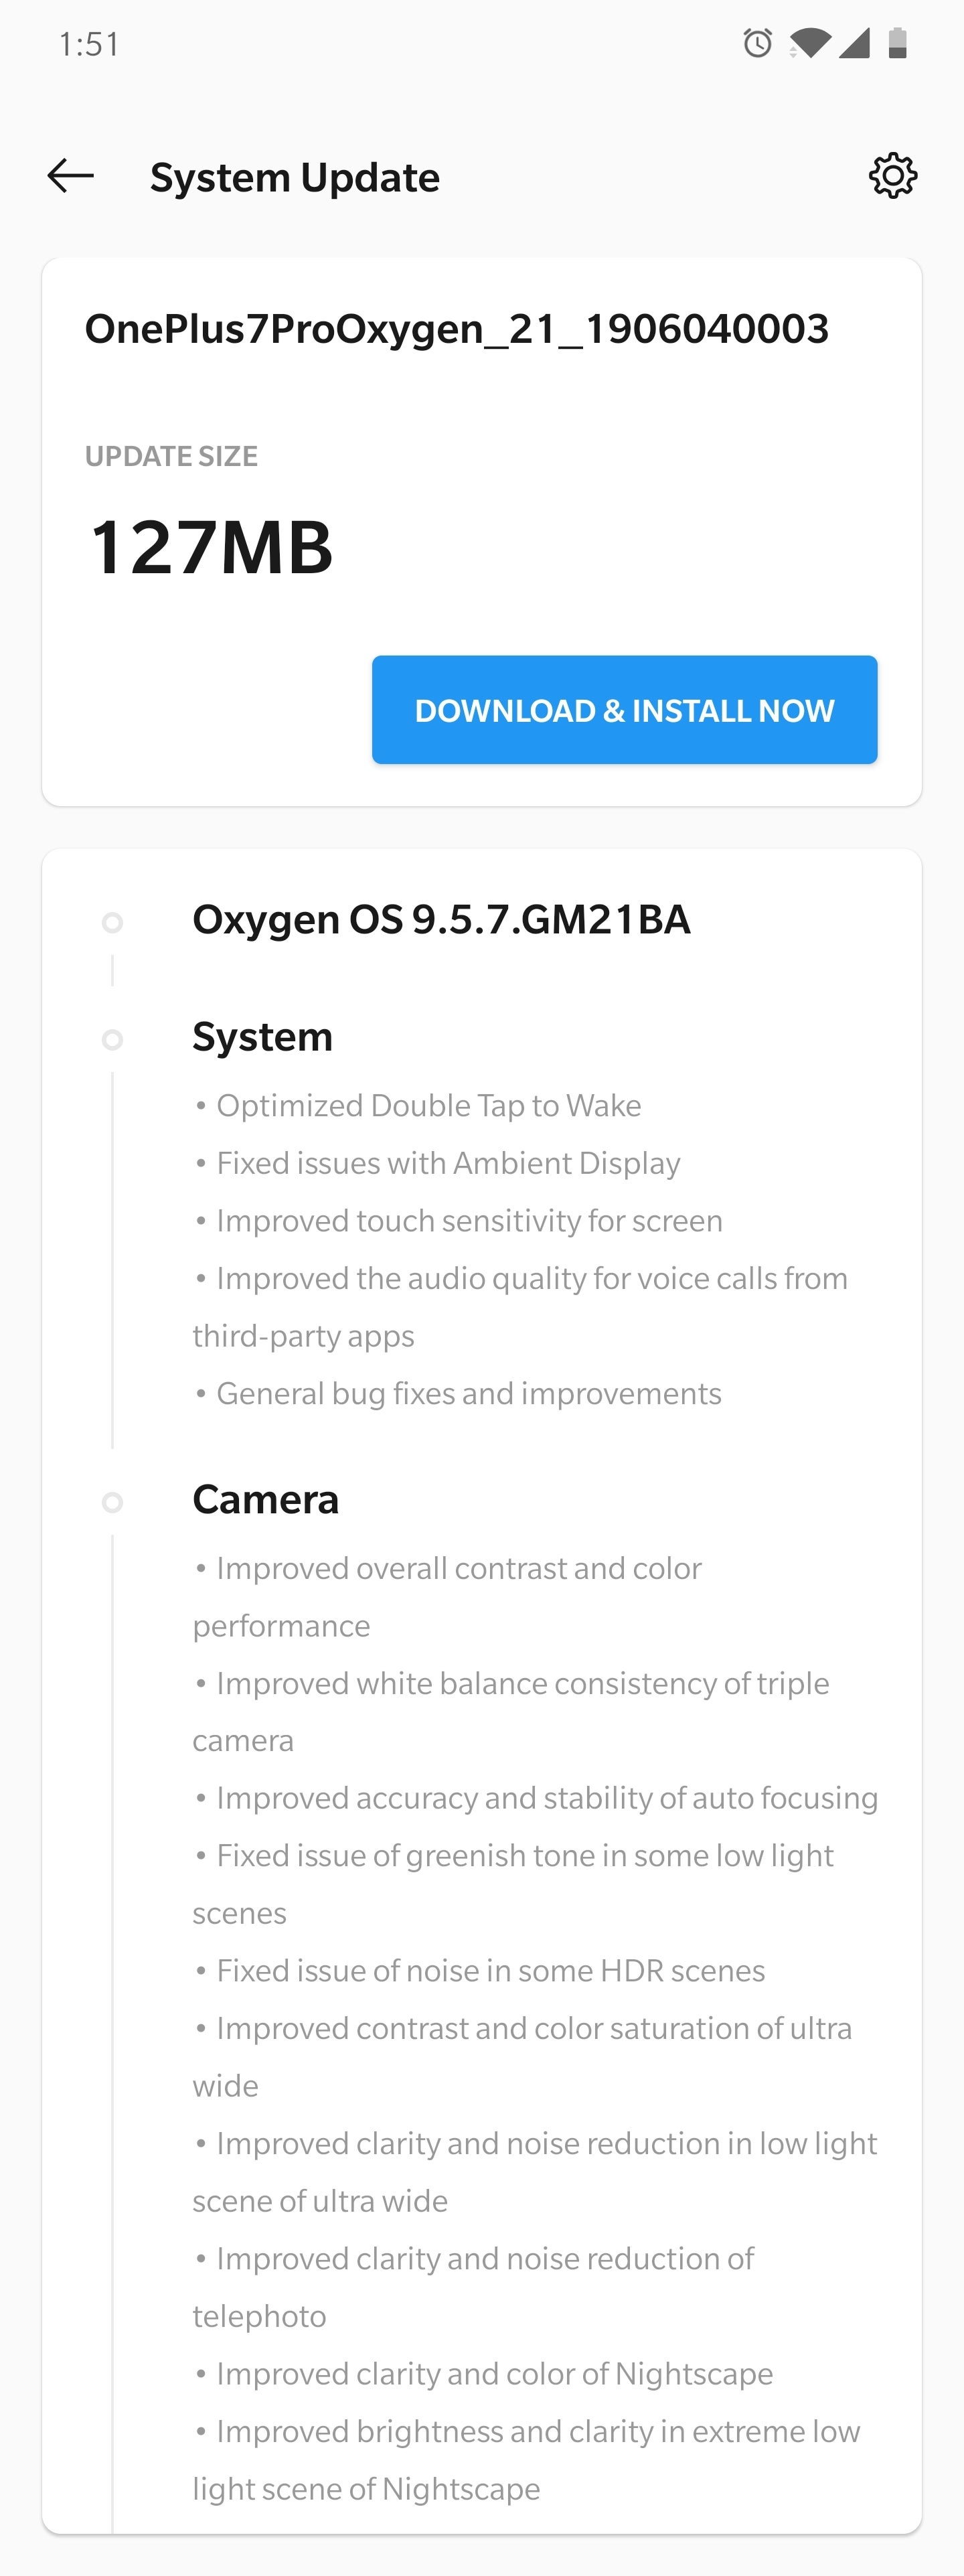 OnePlus 7 Pro BIG Camera Update (Oxygen OS 9.5.7): Photos Before and After